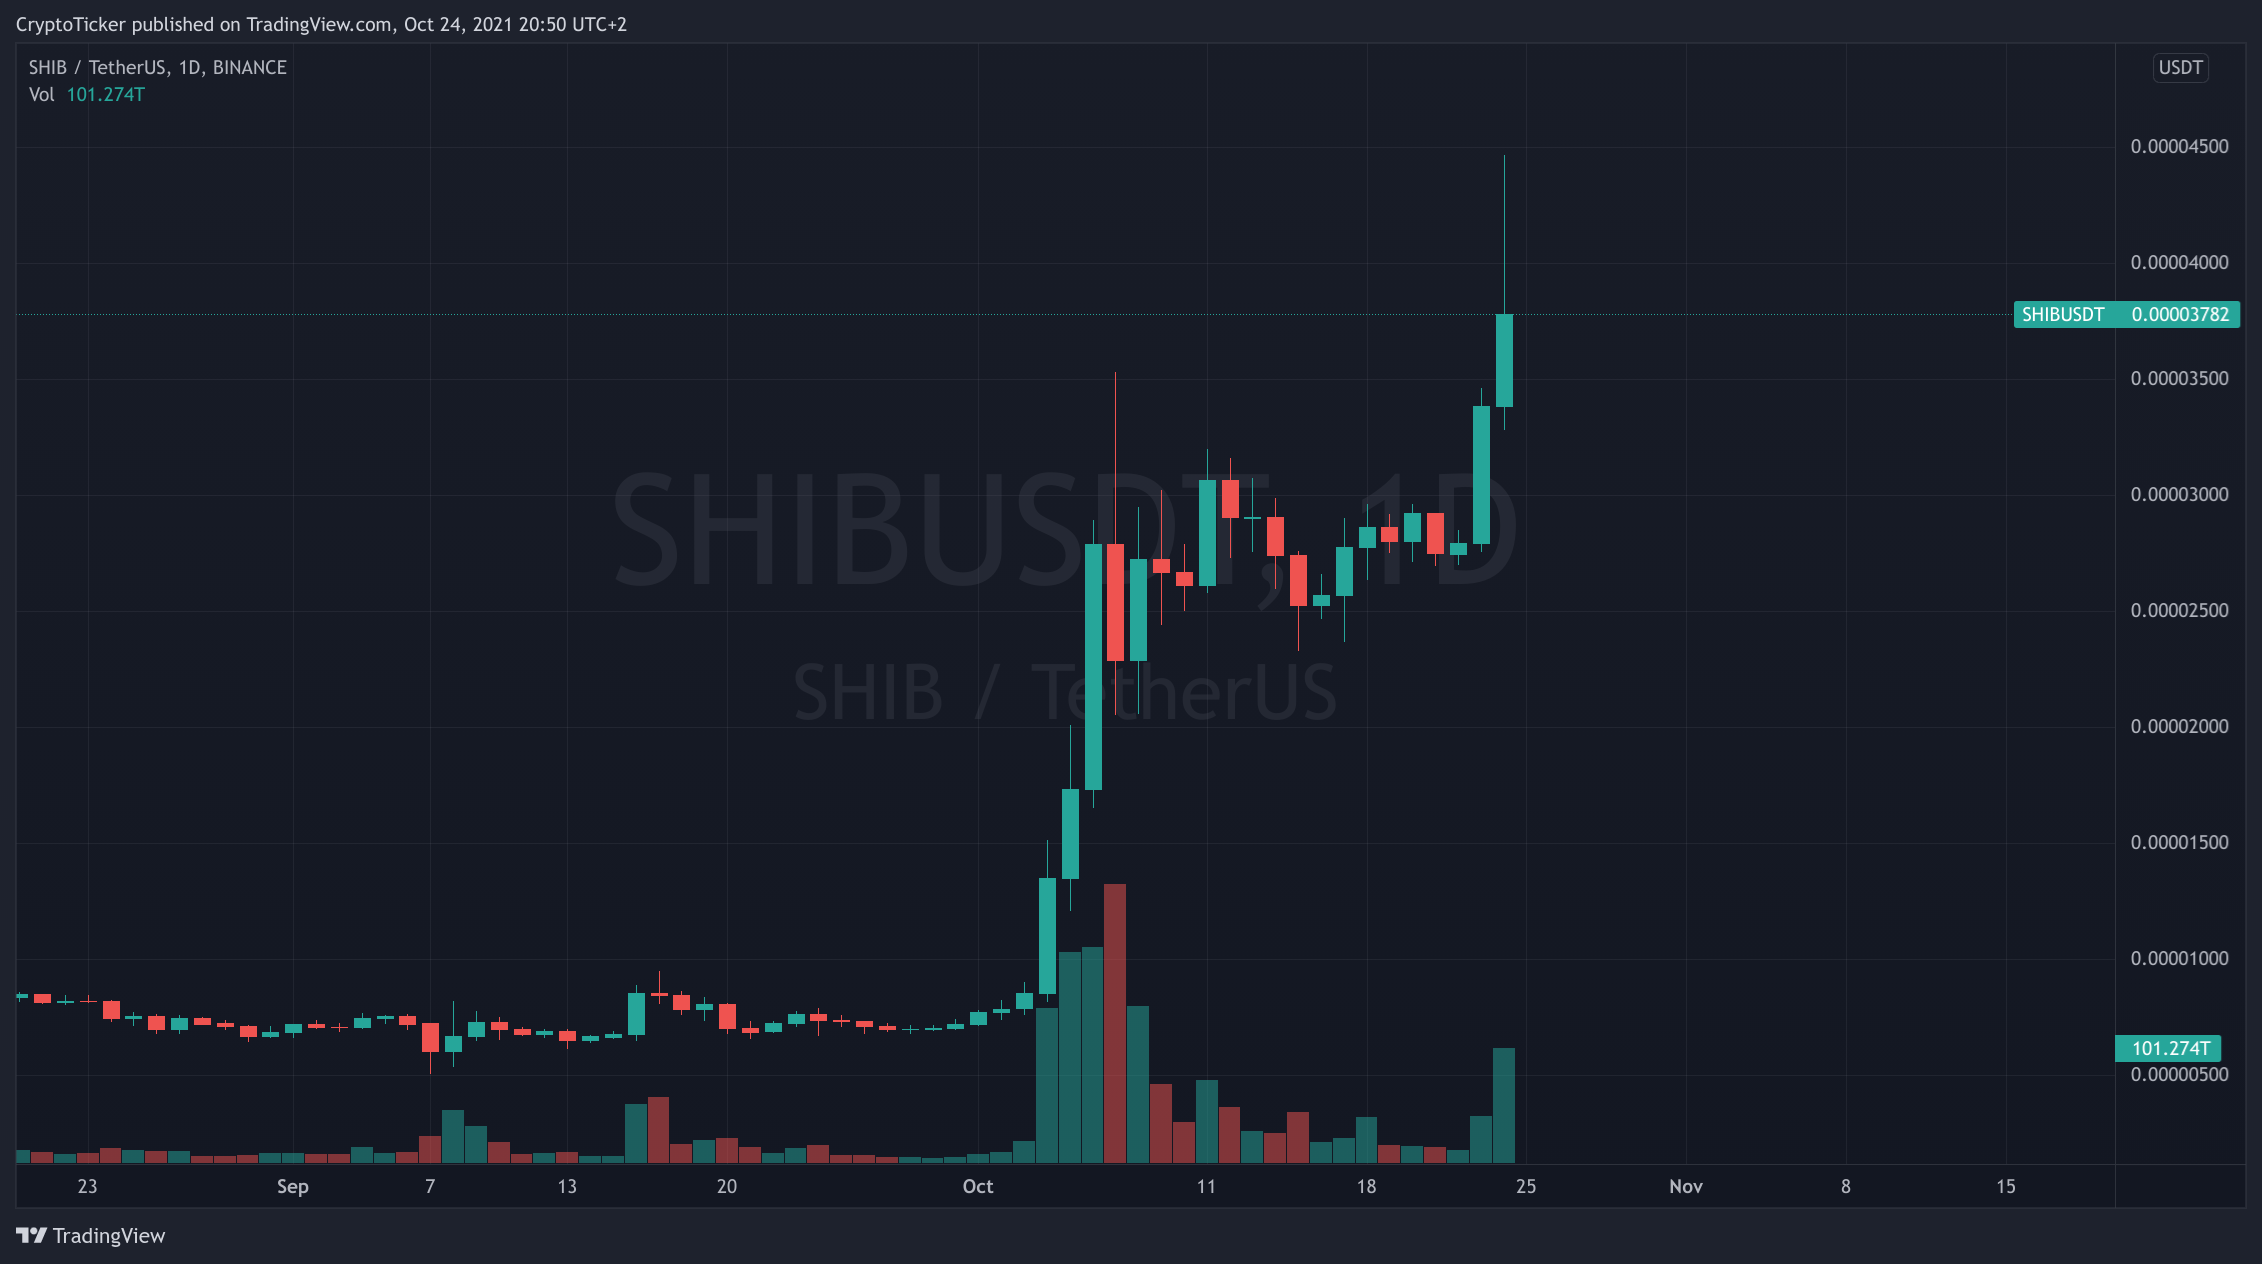 SHIB/USDT 1-day chart showing the current boom of SHIB